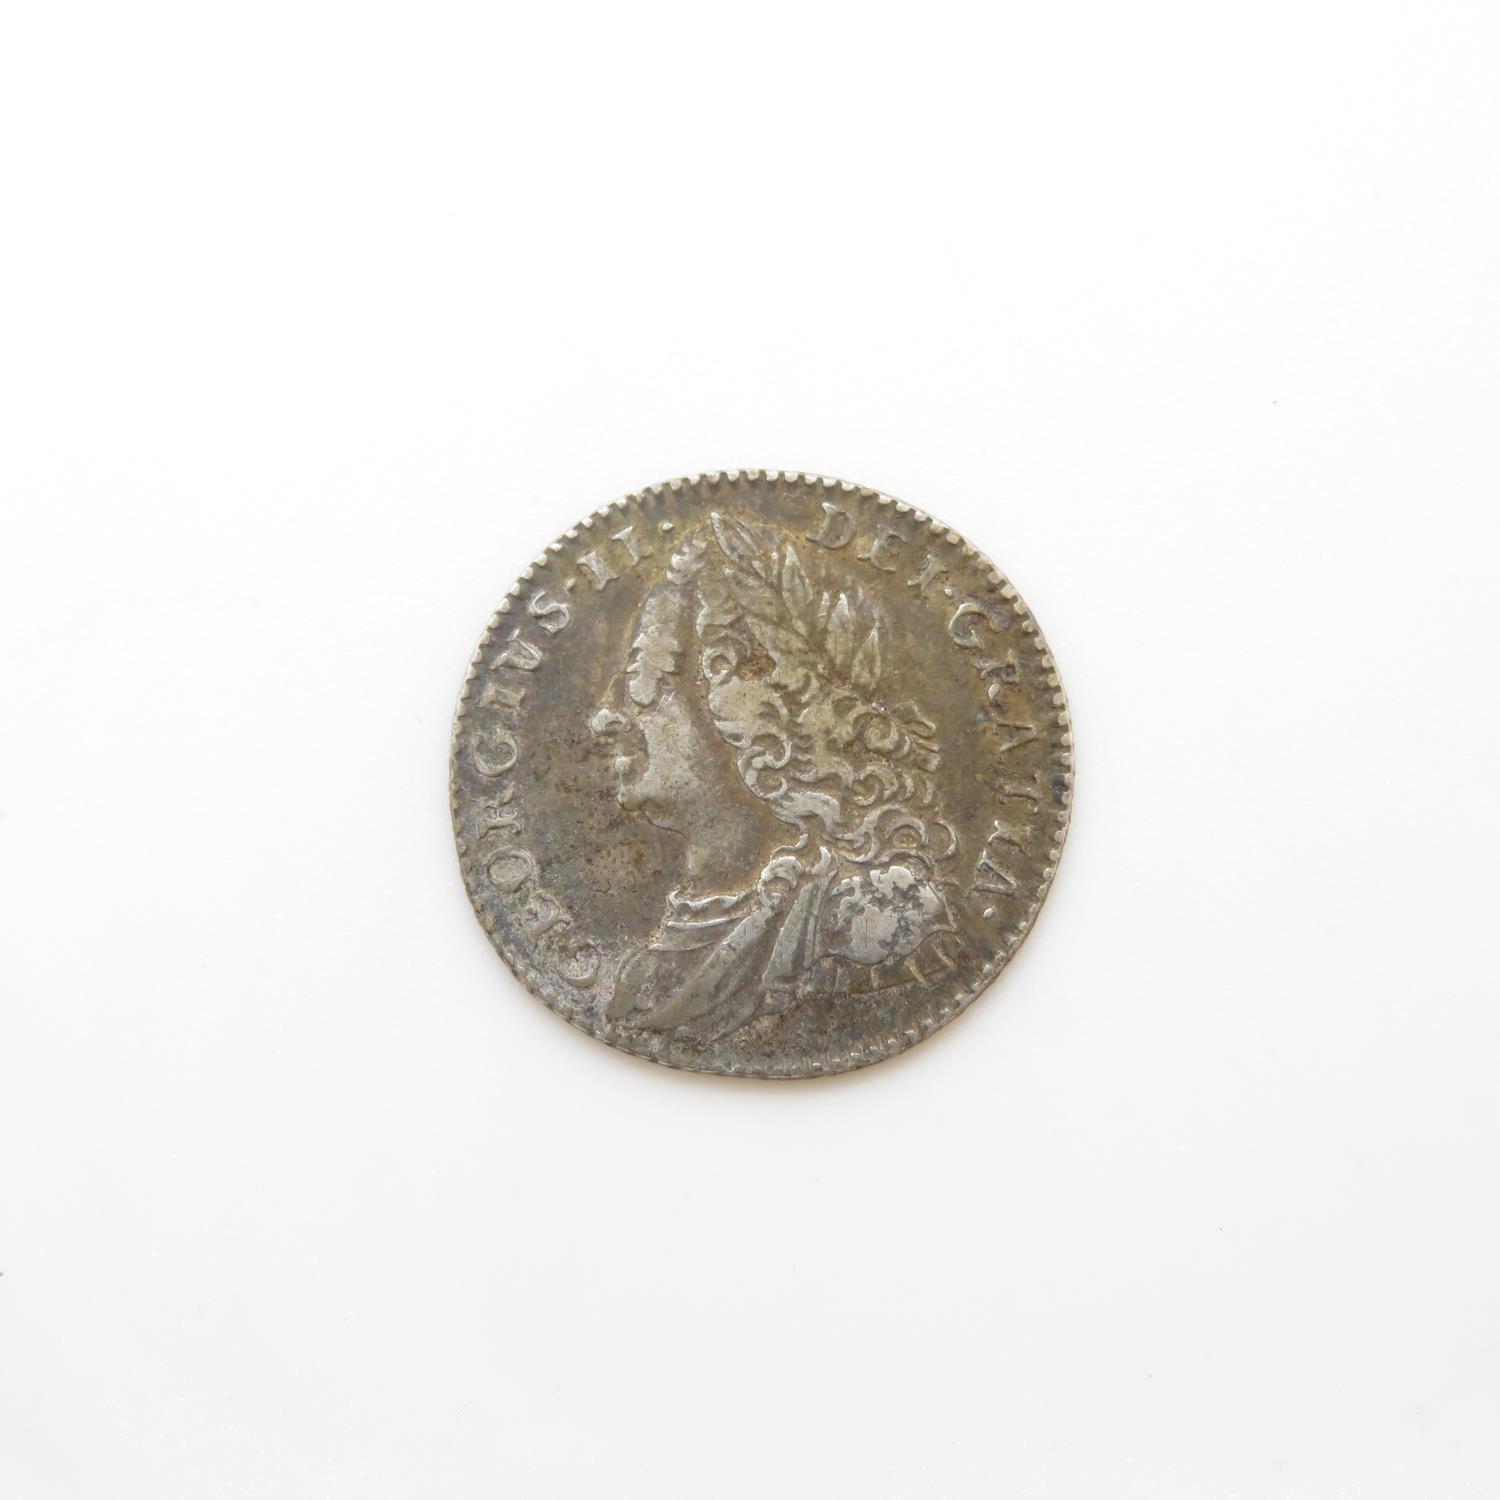 George II sixpence 1758 fine condition - Image 2 of 2